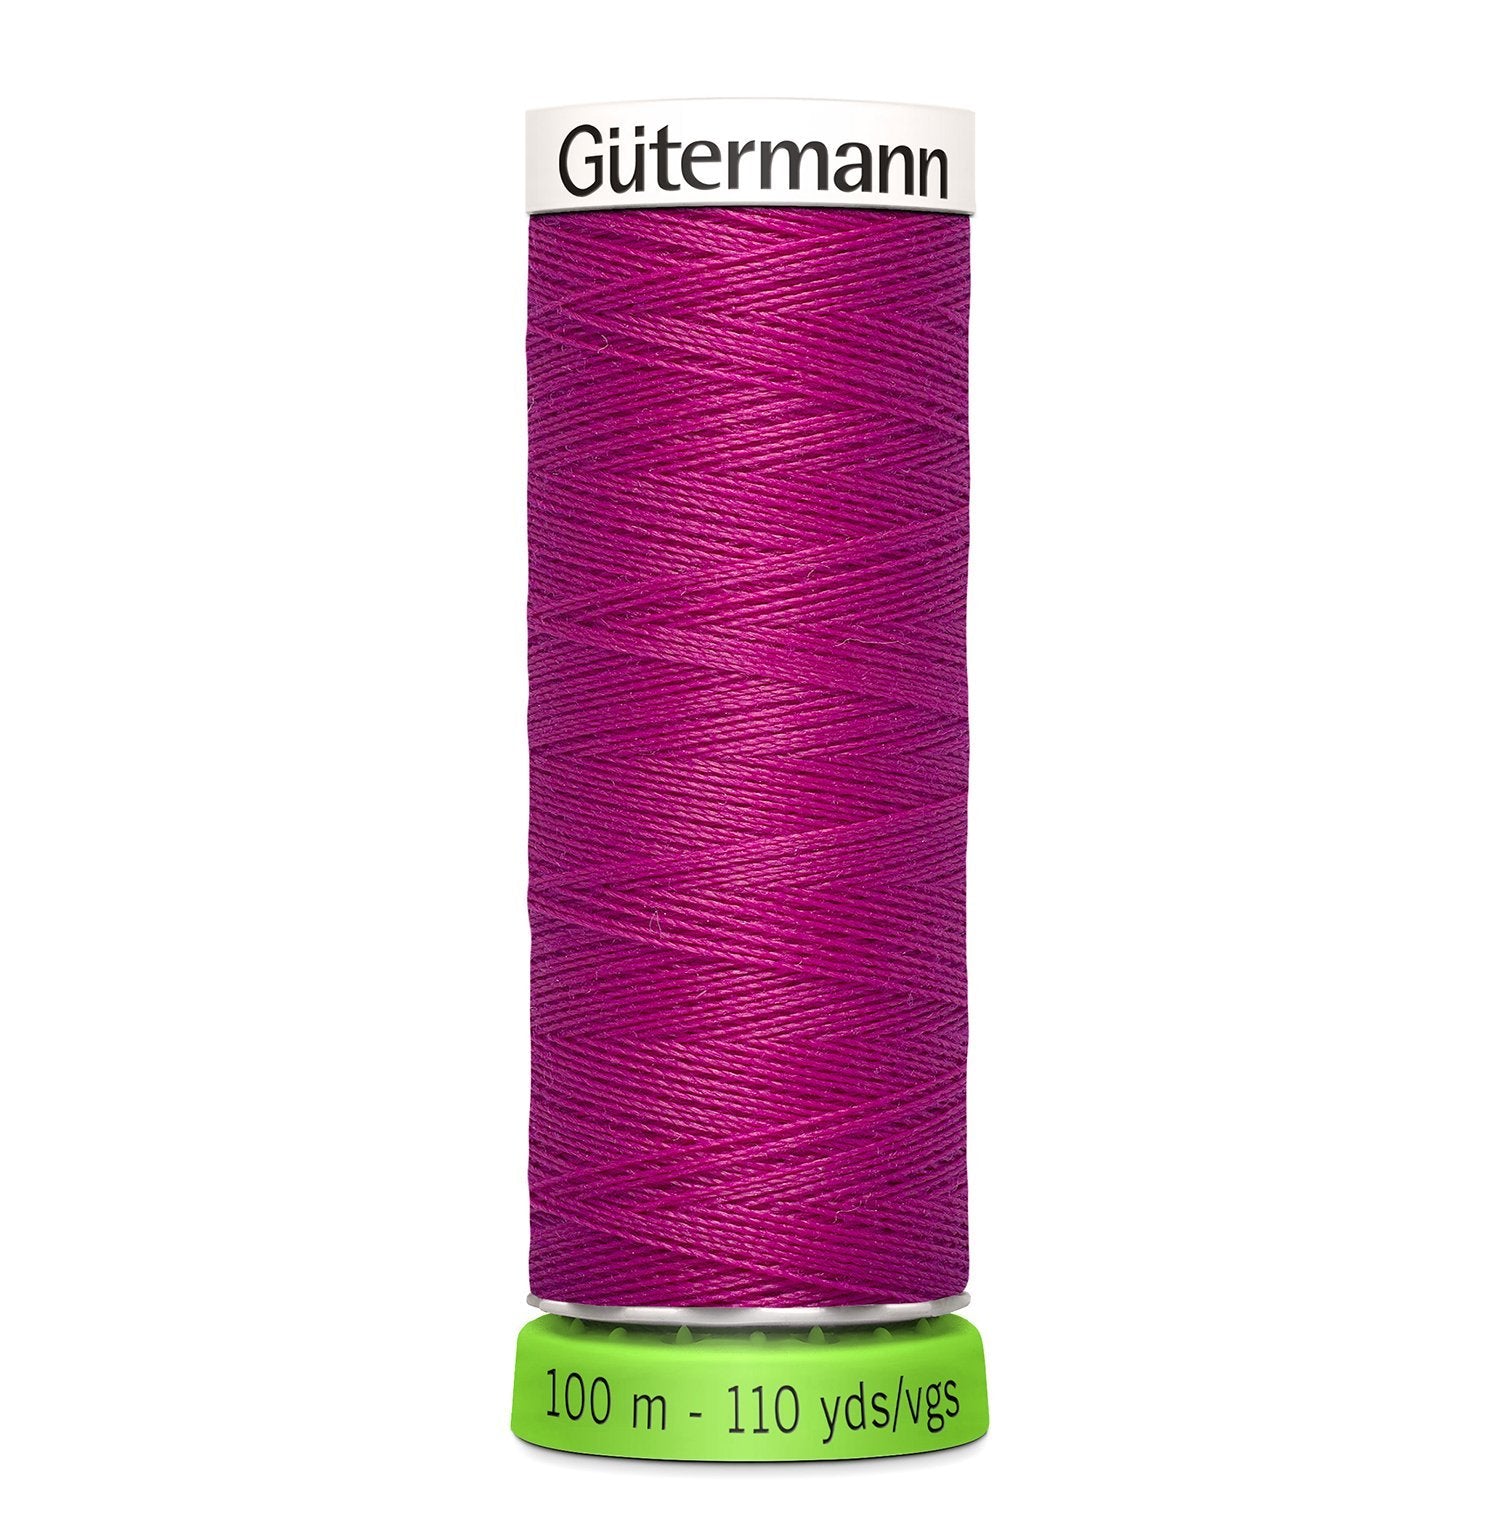 Gutermann Recycled Thread 100m, Colour 877 from Jaycotts Sewing Supplies